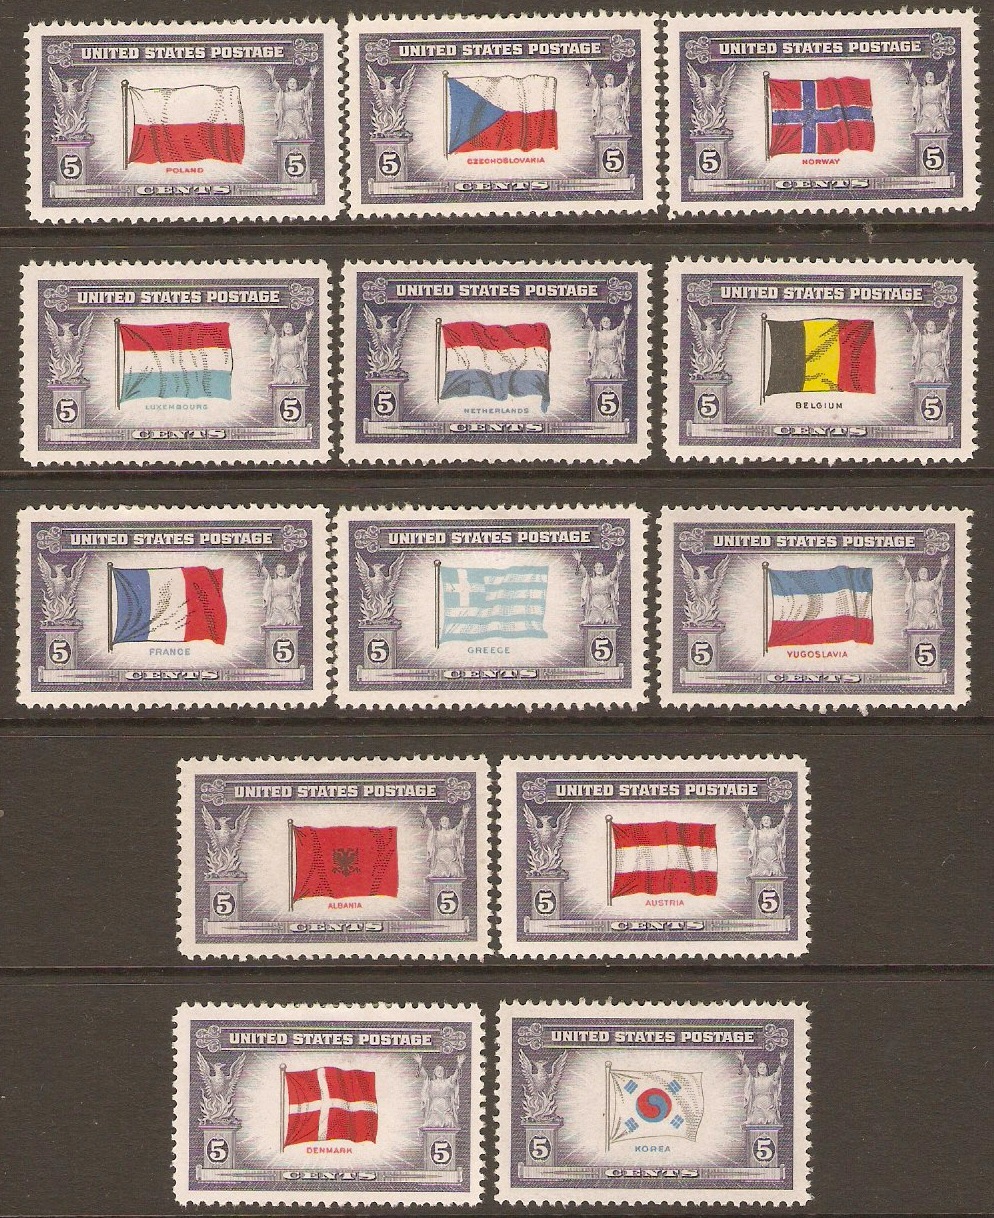 United States 1943 Flags of Oppressed Nations set. SG906-SG918.